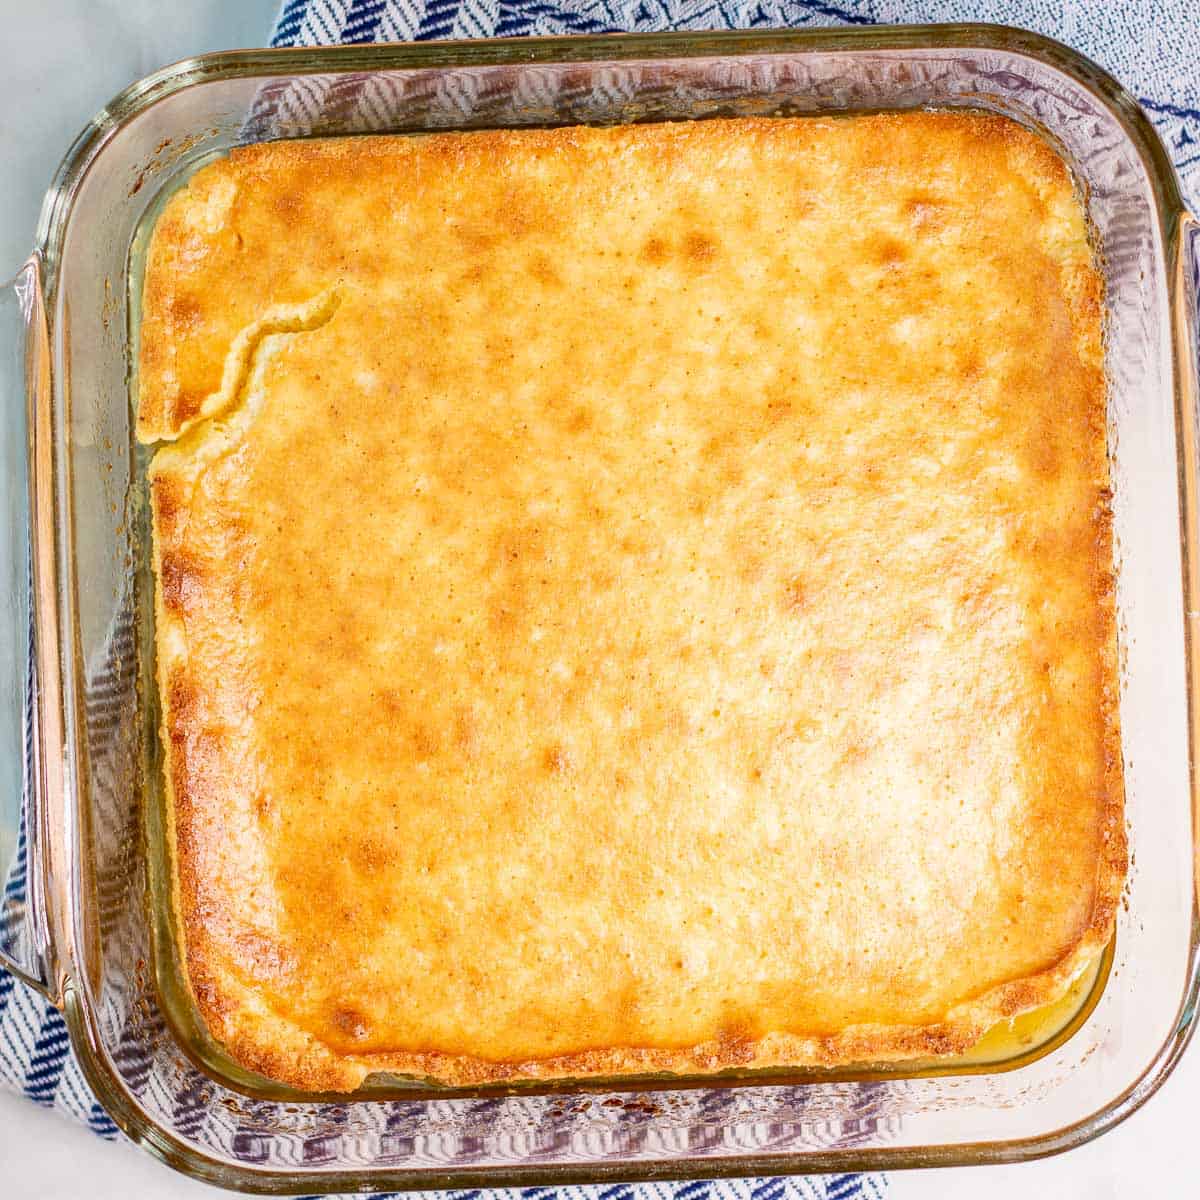 Best Jiffy Cornbread Recipe freshly baked and right out of the oven.